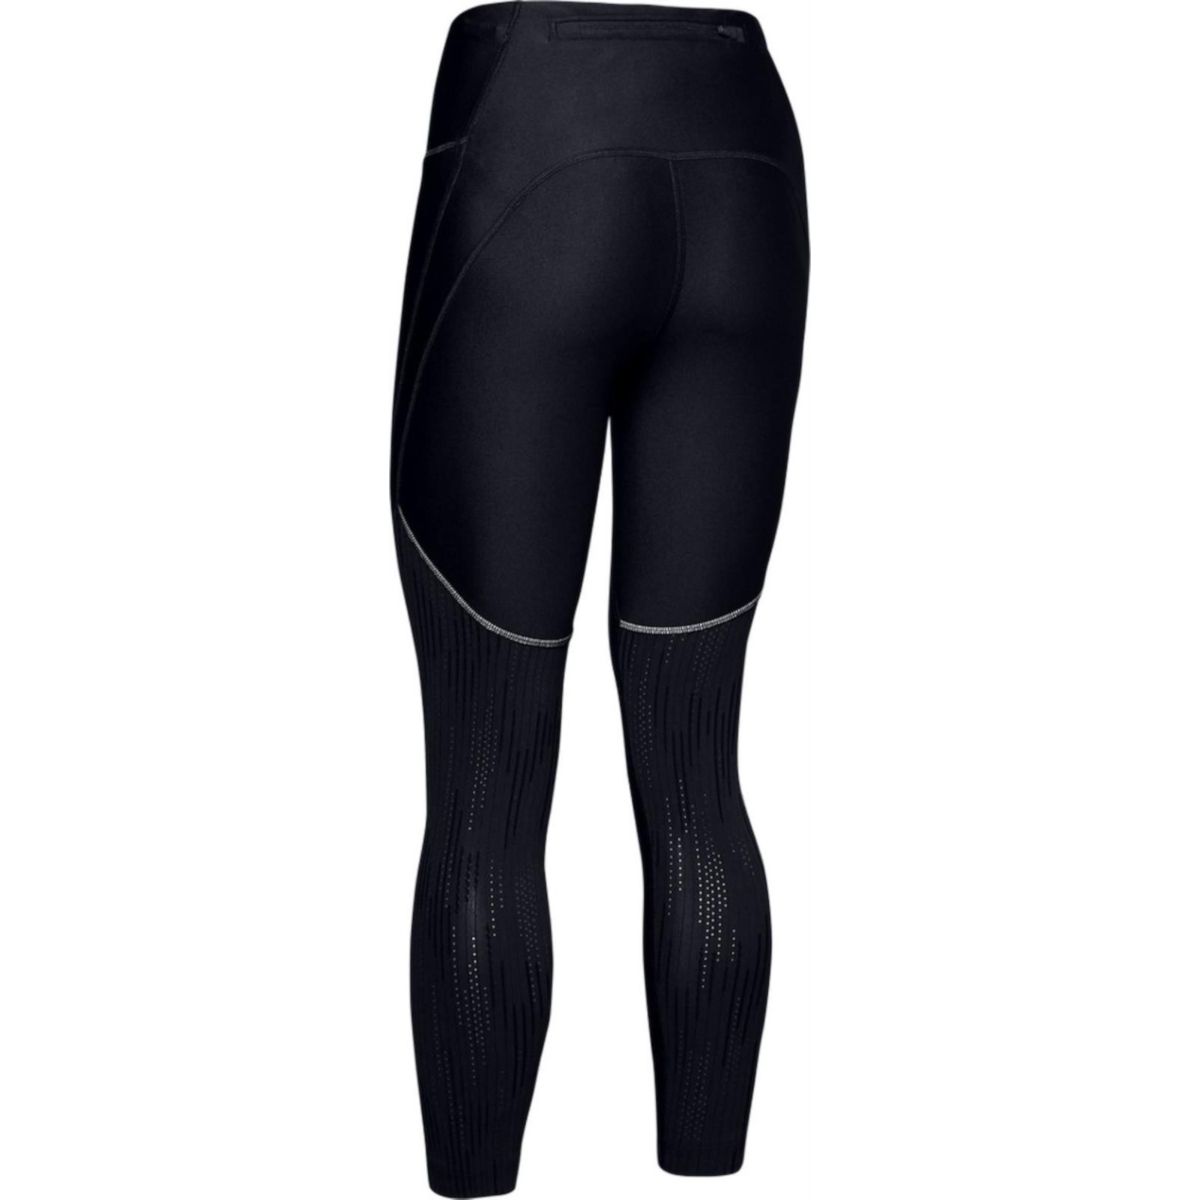 Under Armour Fly Fast Glare Raise Women's Tights 1343130-001